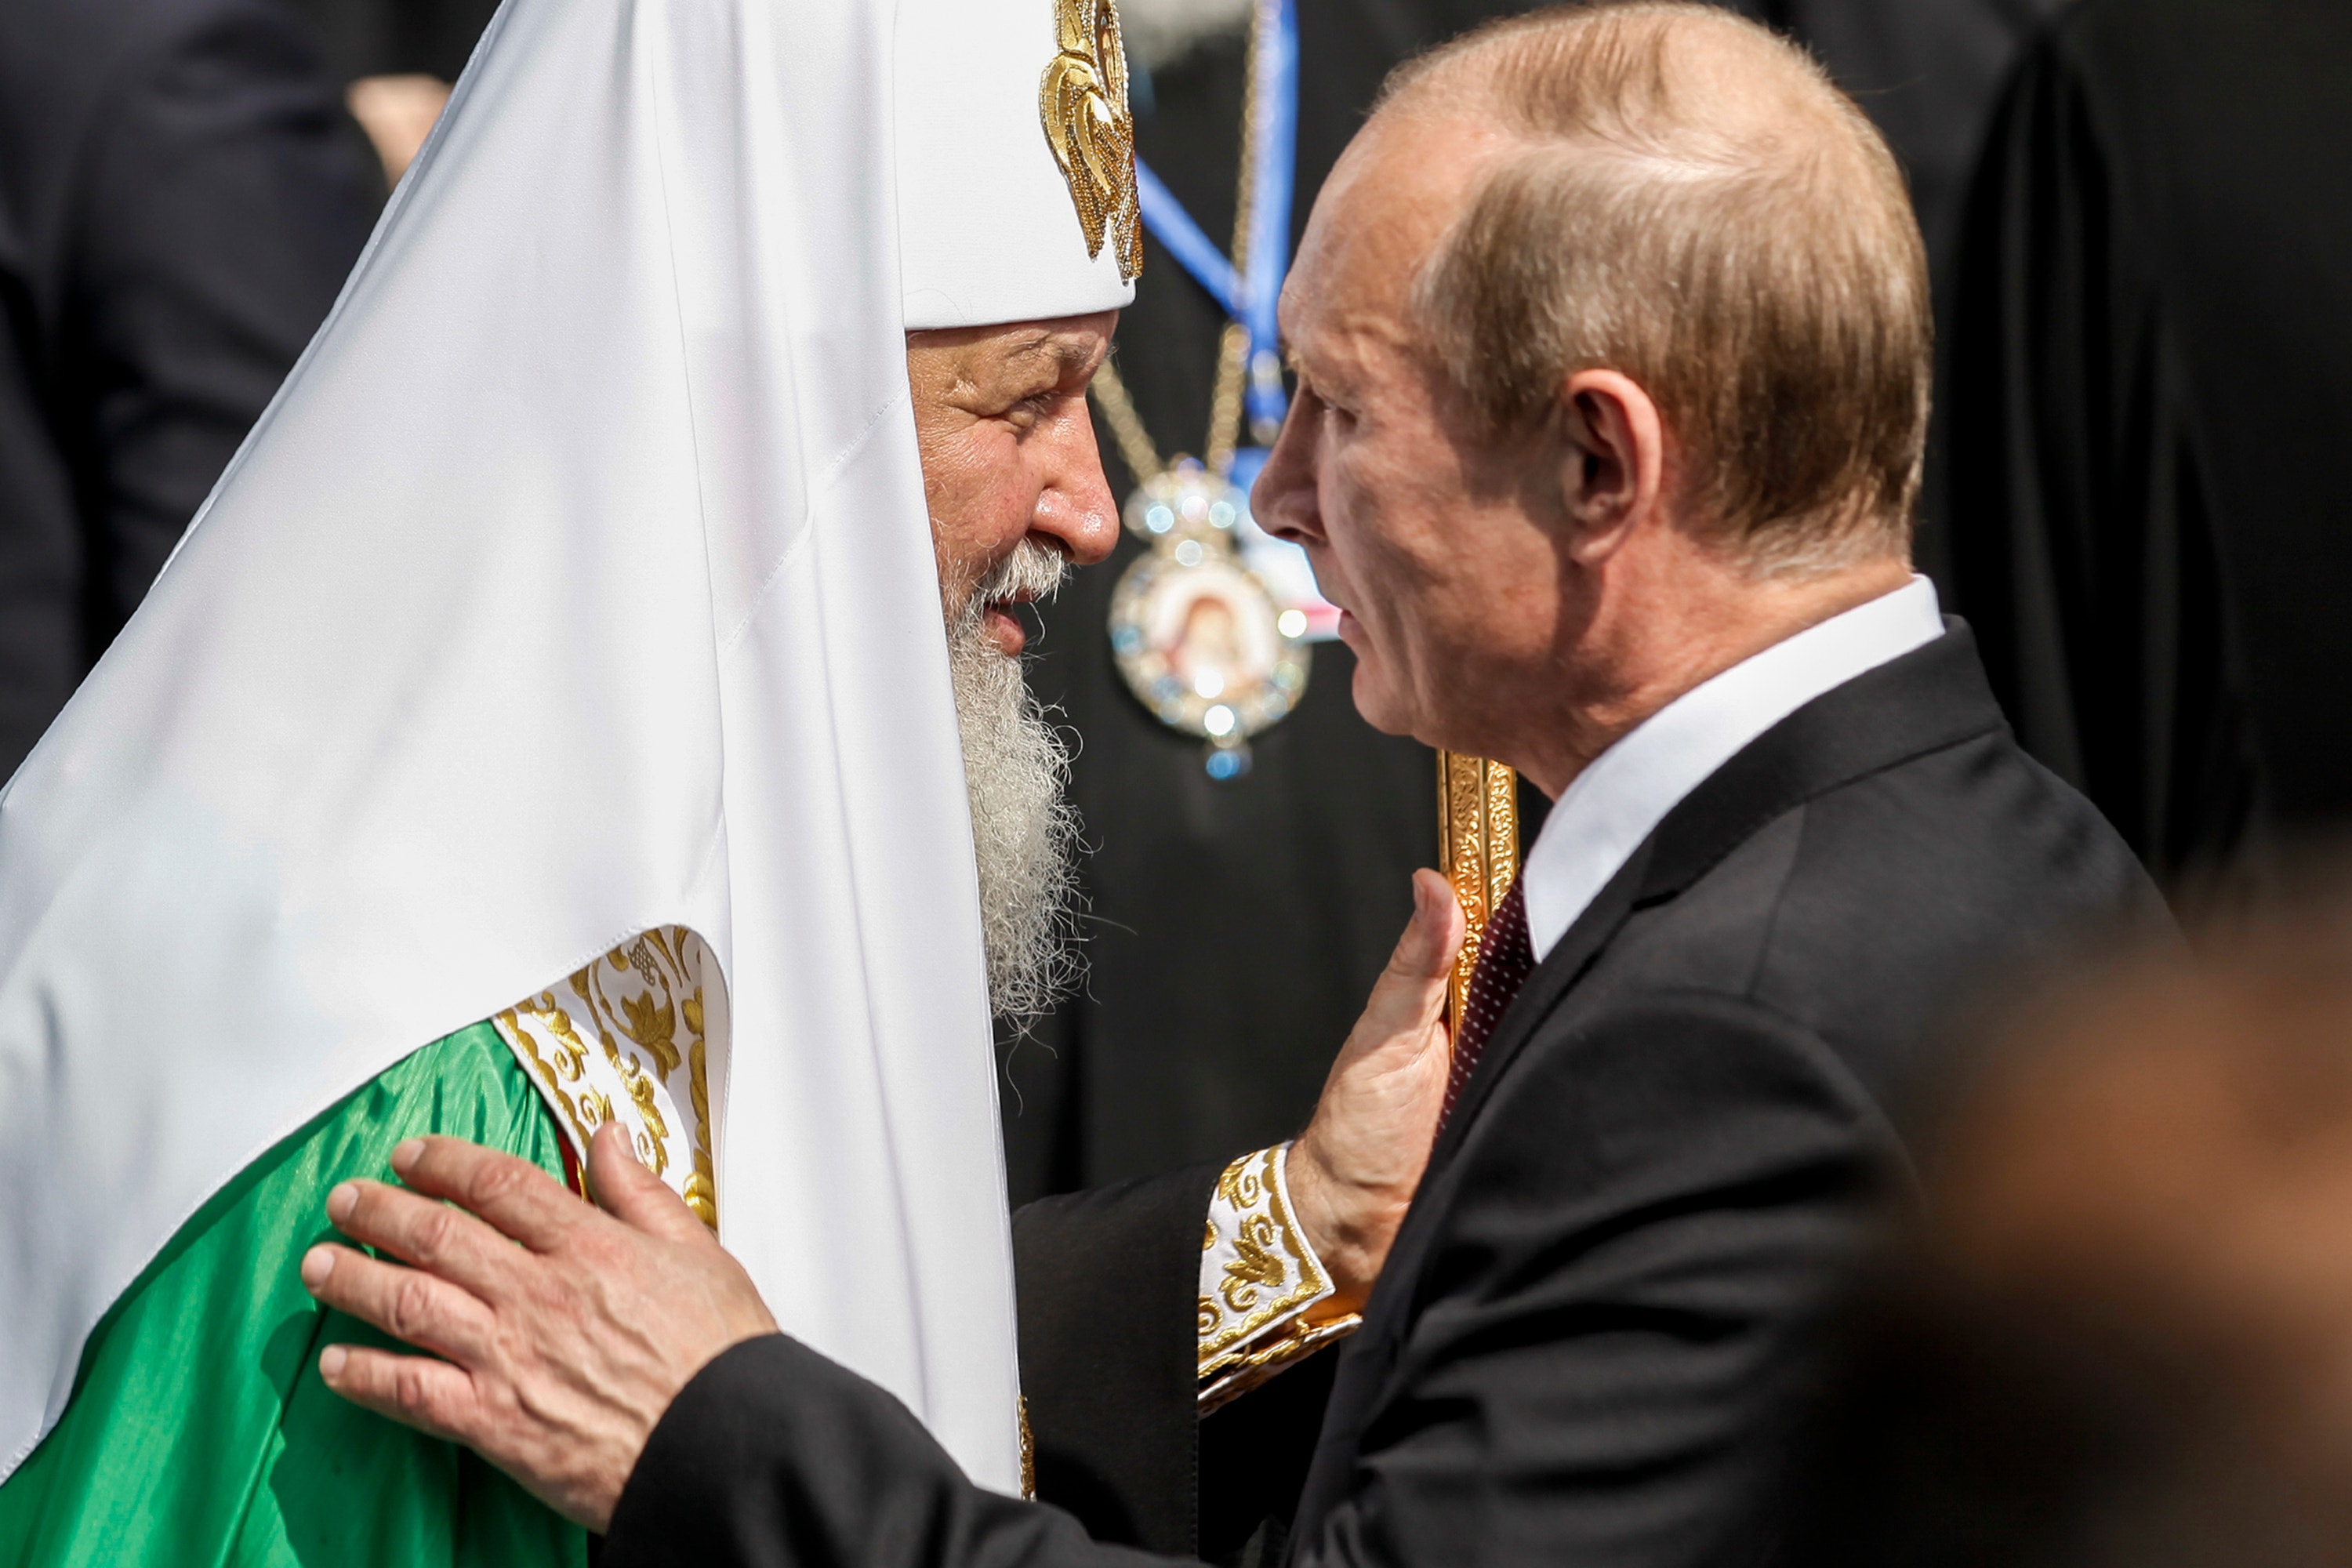 Putin's Soldiers Who Die In Ukraine War Are Making 'Sacrifices,' Says Russian Church Leader: 'Washes Away All Sins'